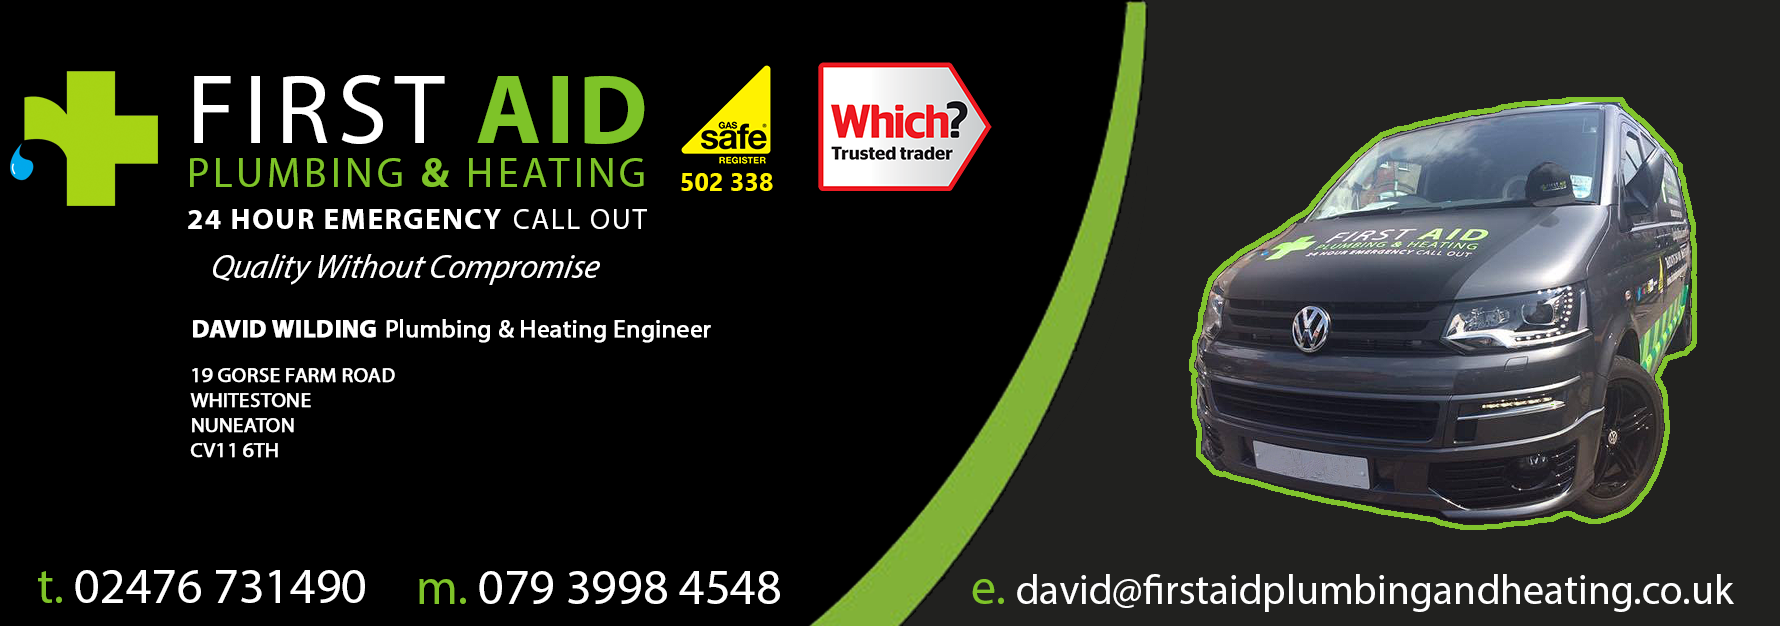 Firstaid Plumbing & Heating Engineers covering Coventry, Warwickshire and West Midlands